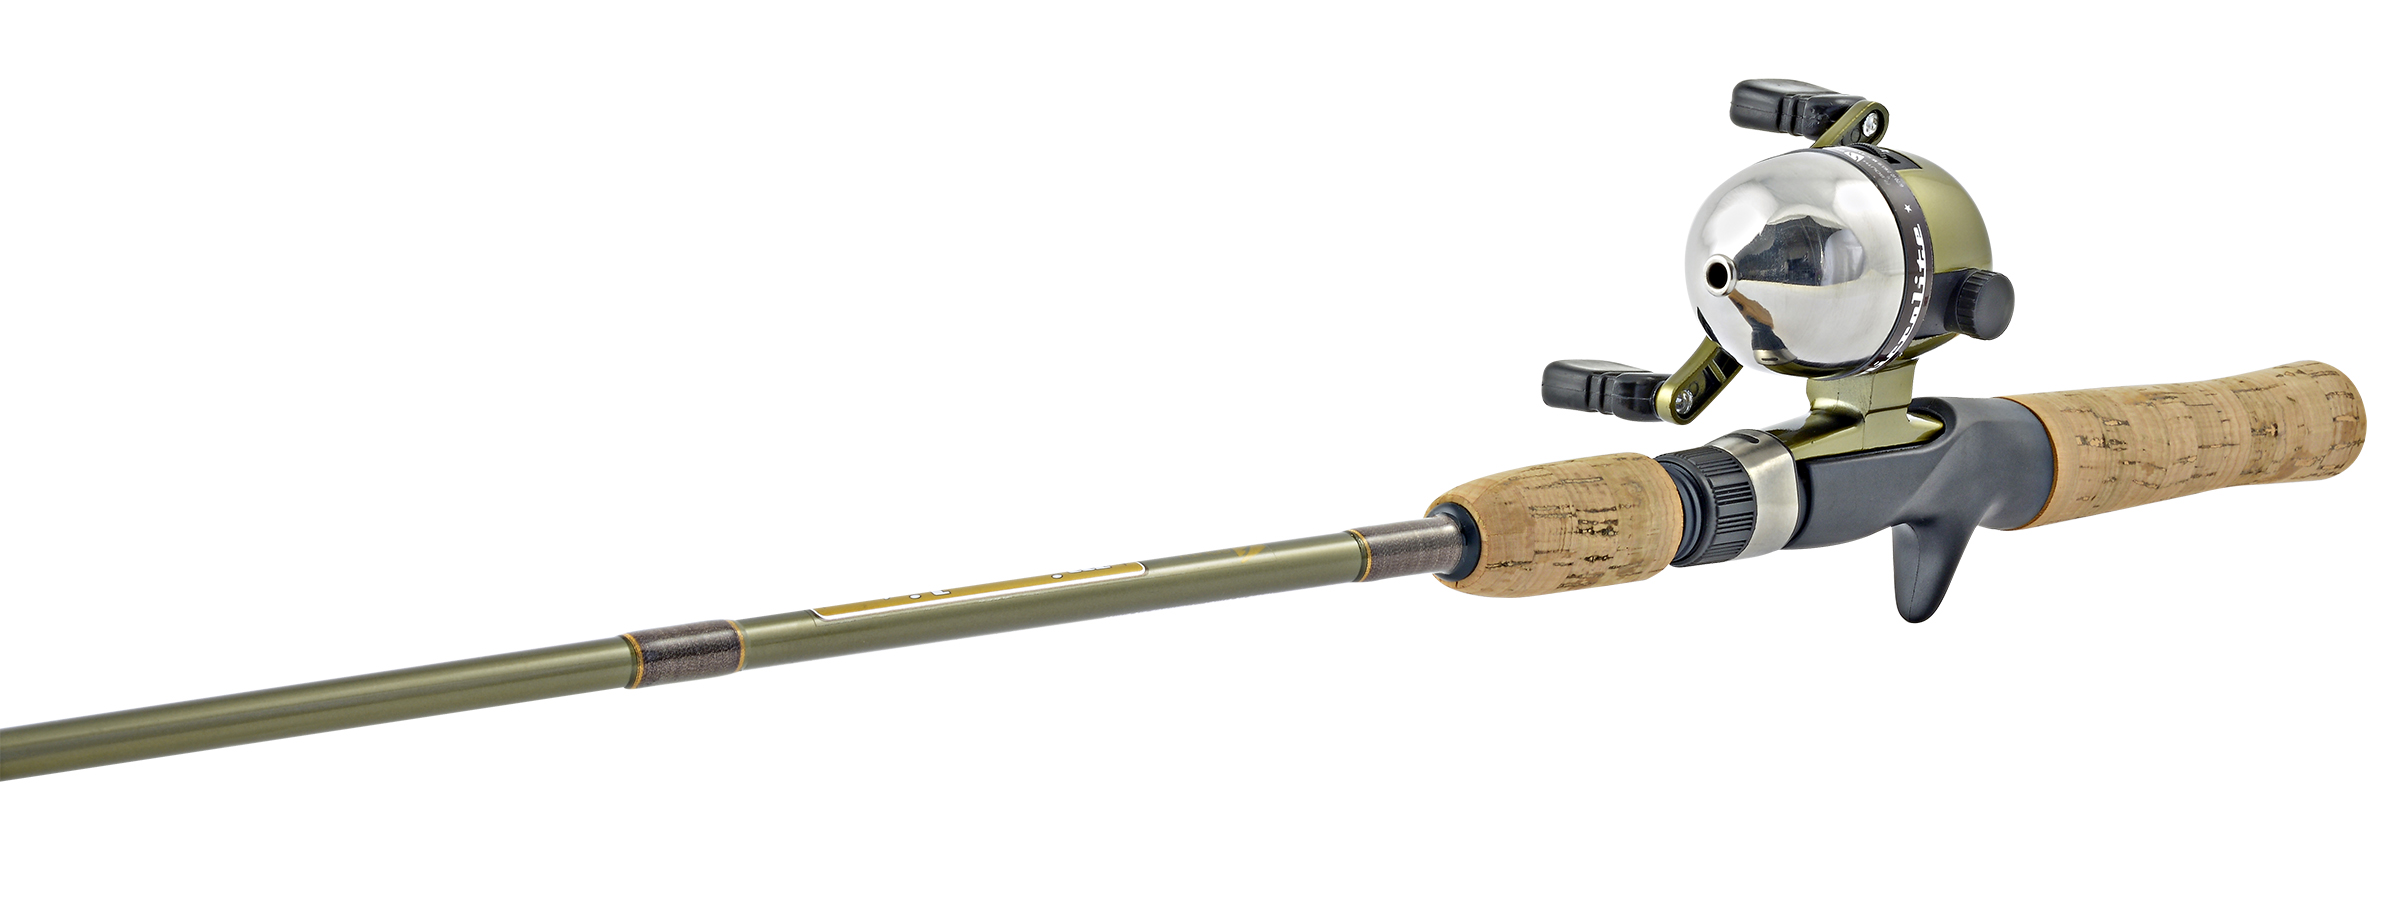 South Bend Microlite Ultralight Spincast Rod and Reel Combo - 5' MLSC/502UL  — CampSaver